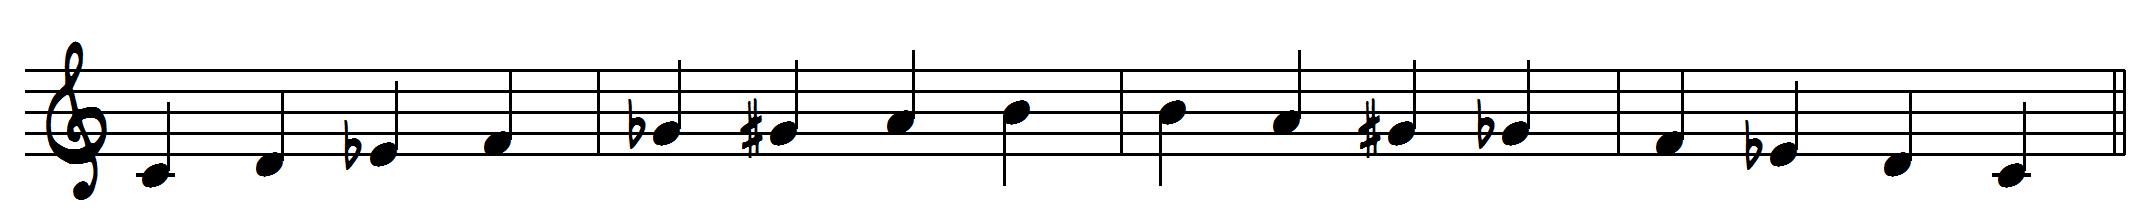 jazz scales: Whole-Half Diminished scale